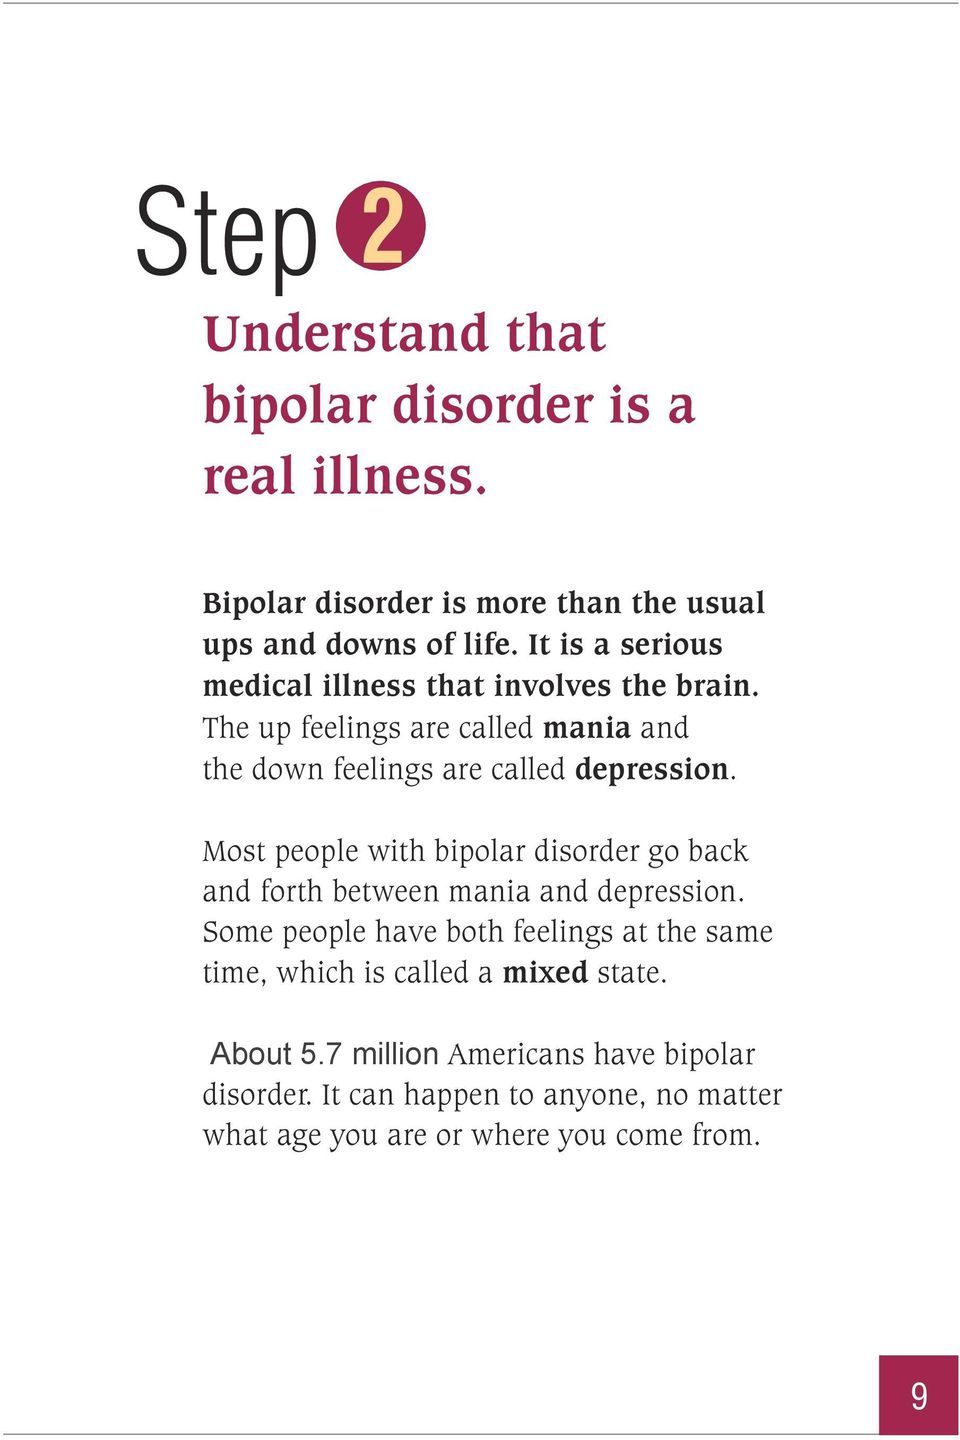 Most people with bipolar disorder go back and forth between mania and depression.